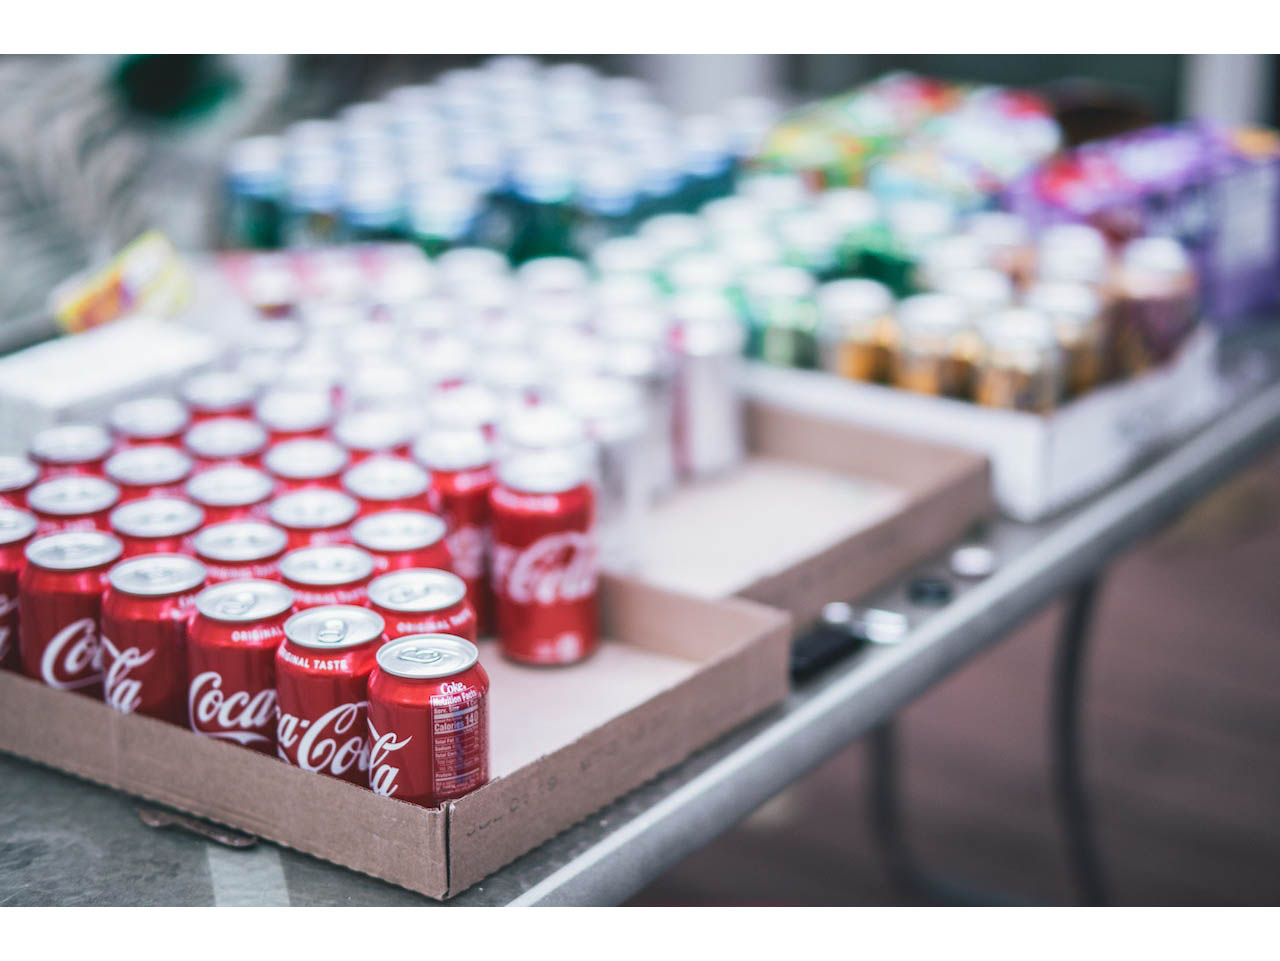 Coca-Cola retains its title as the world’s most valuable non-alcoholic drinks brand